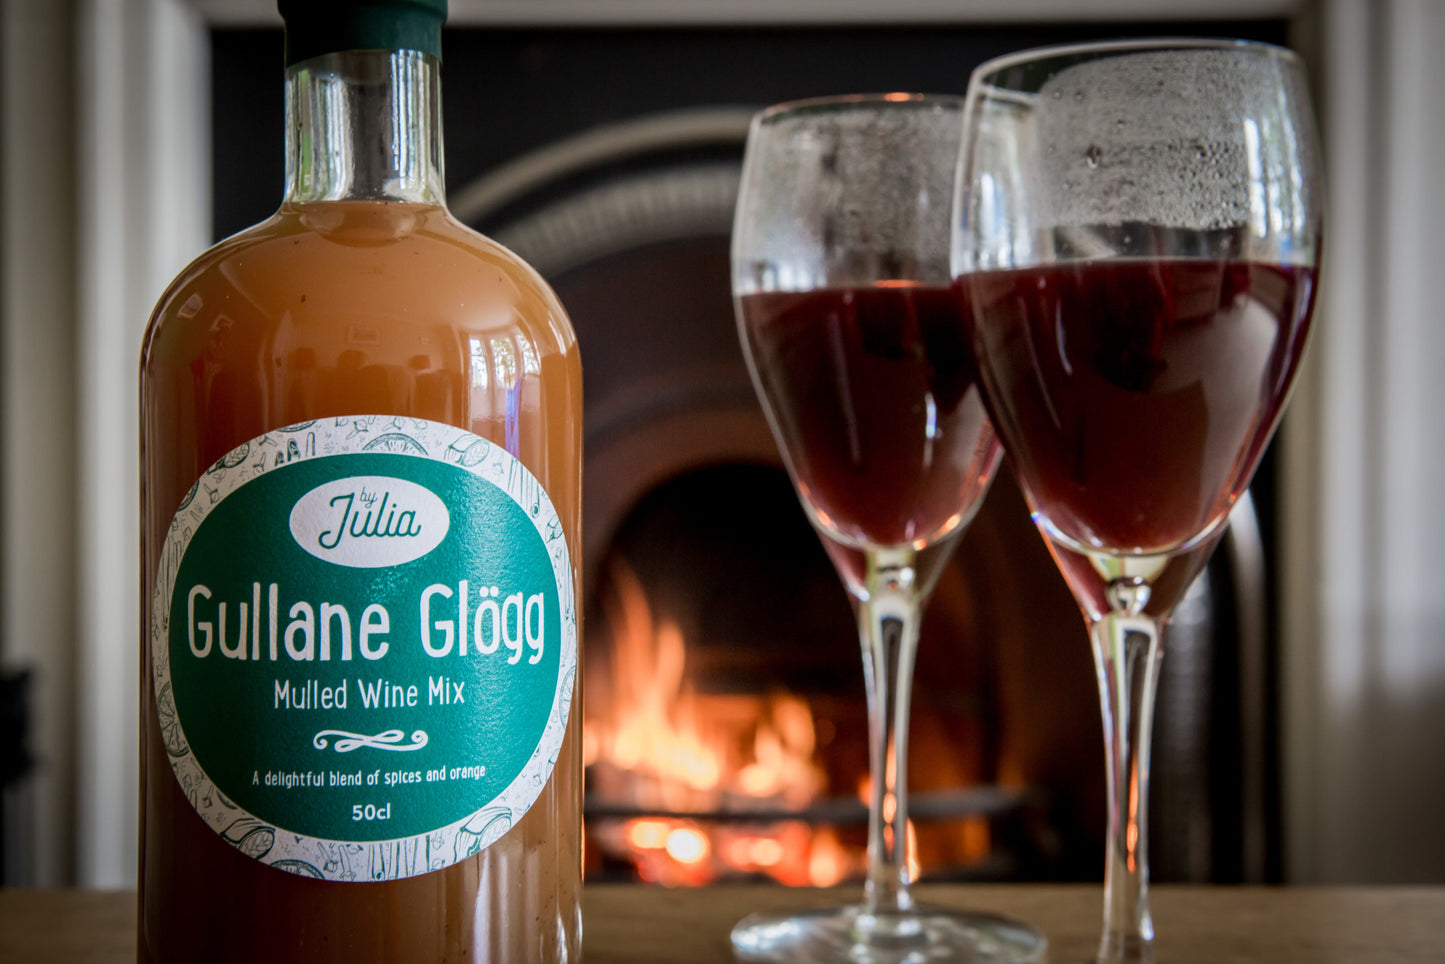 Gullane Glögg Mulled Wine Mix and two glasses of mulled wine in front of fire